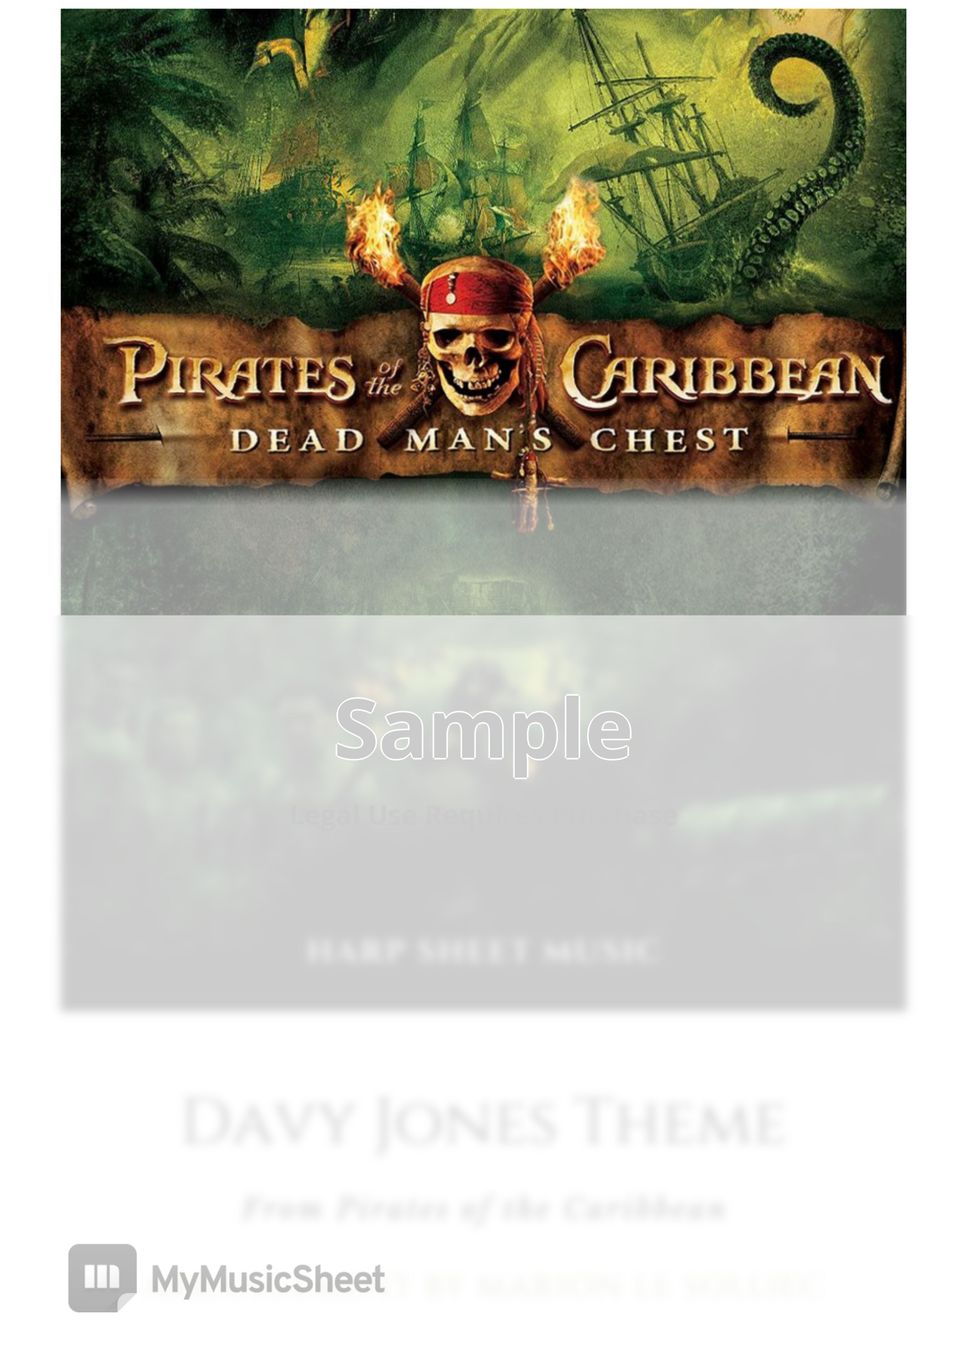 Davy Jones Song - Pirates of the Caribbean